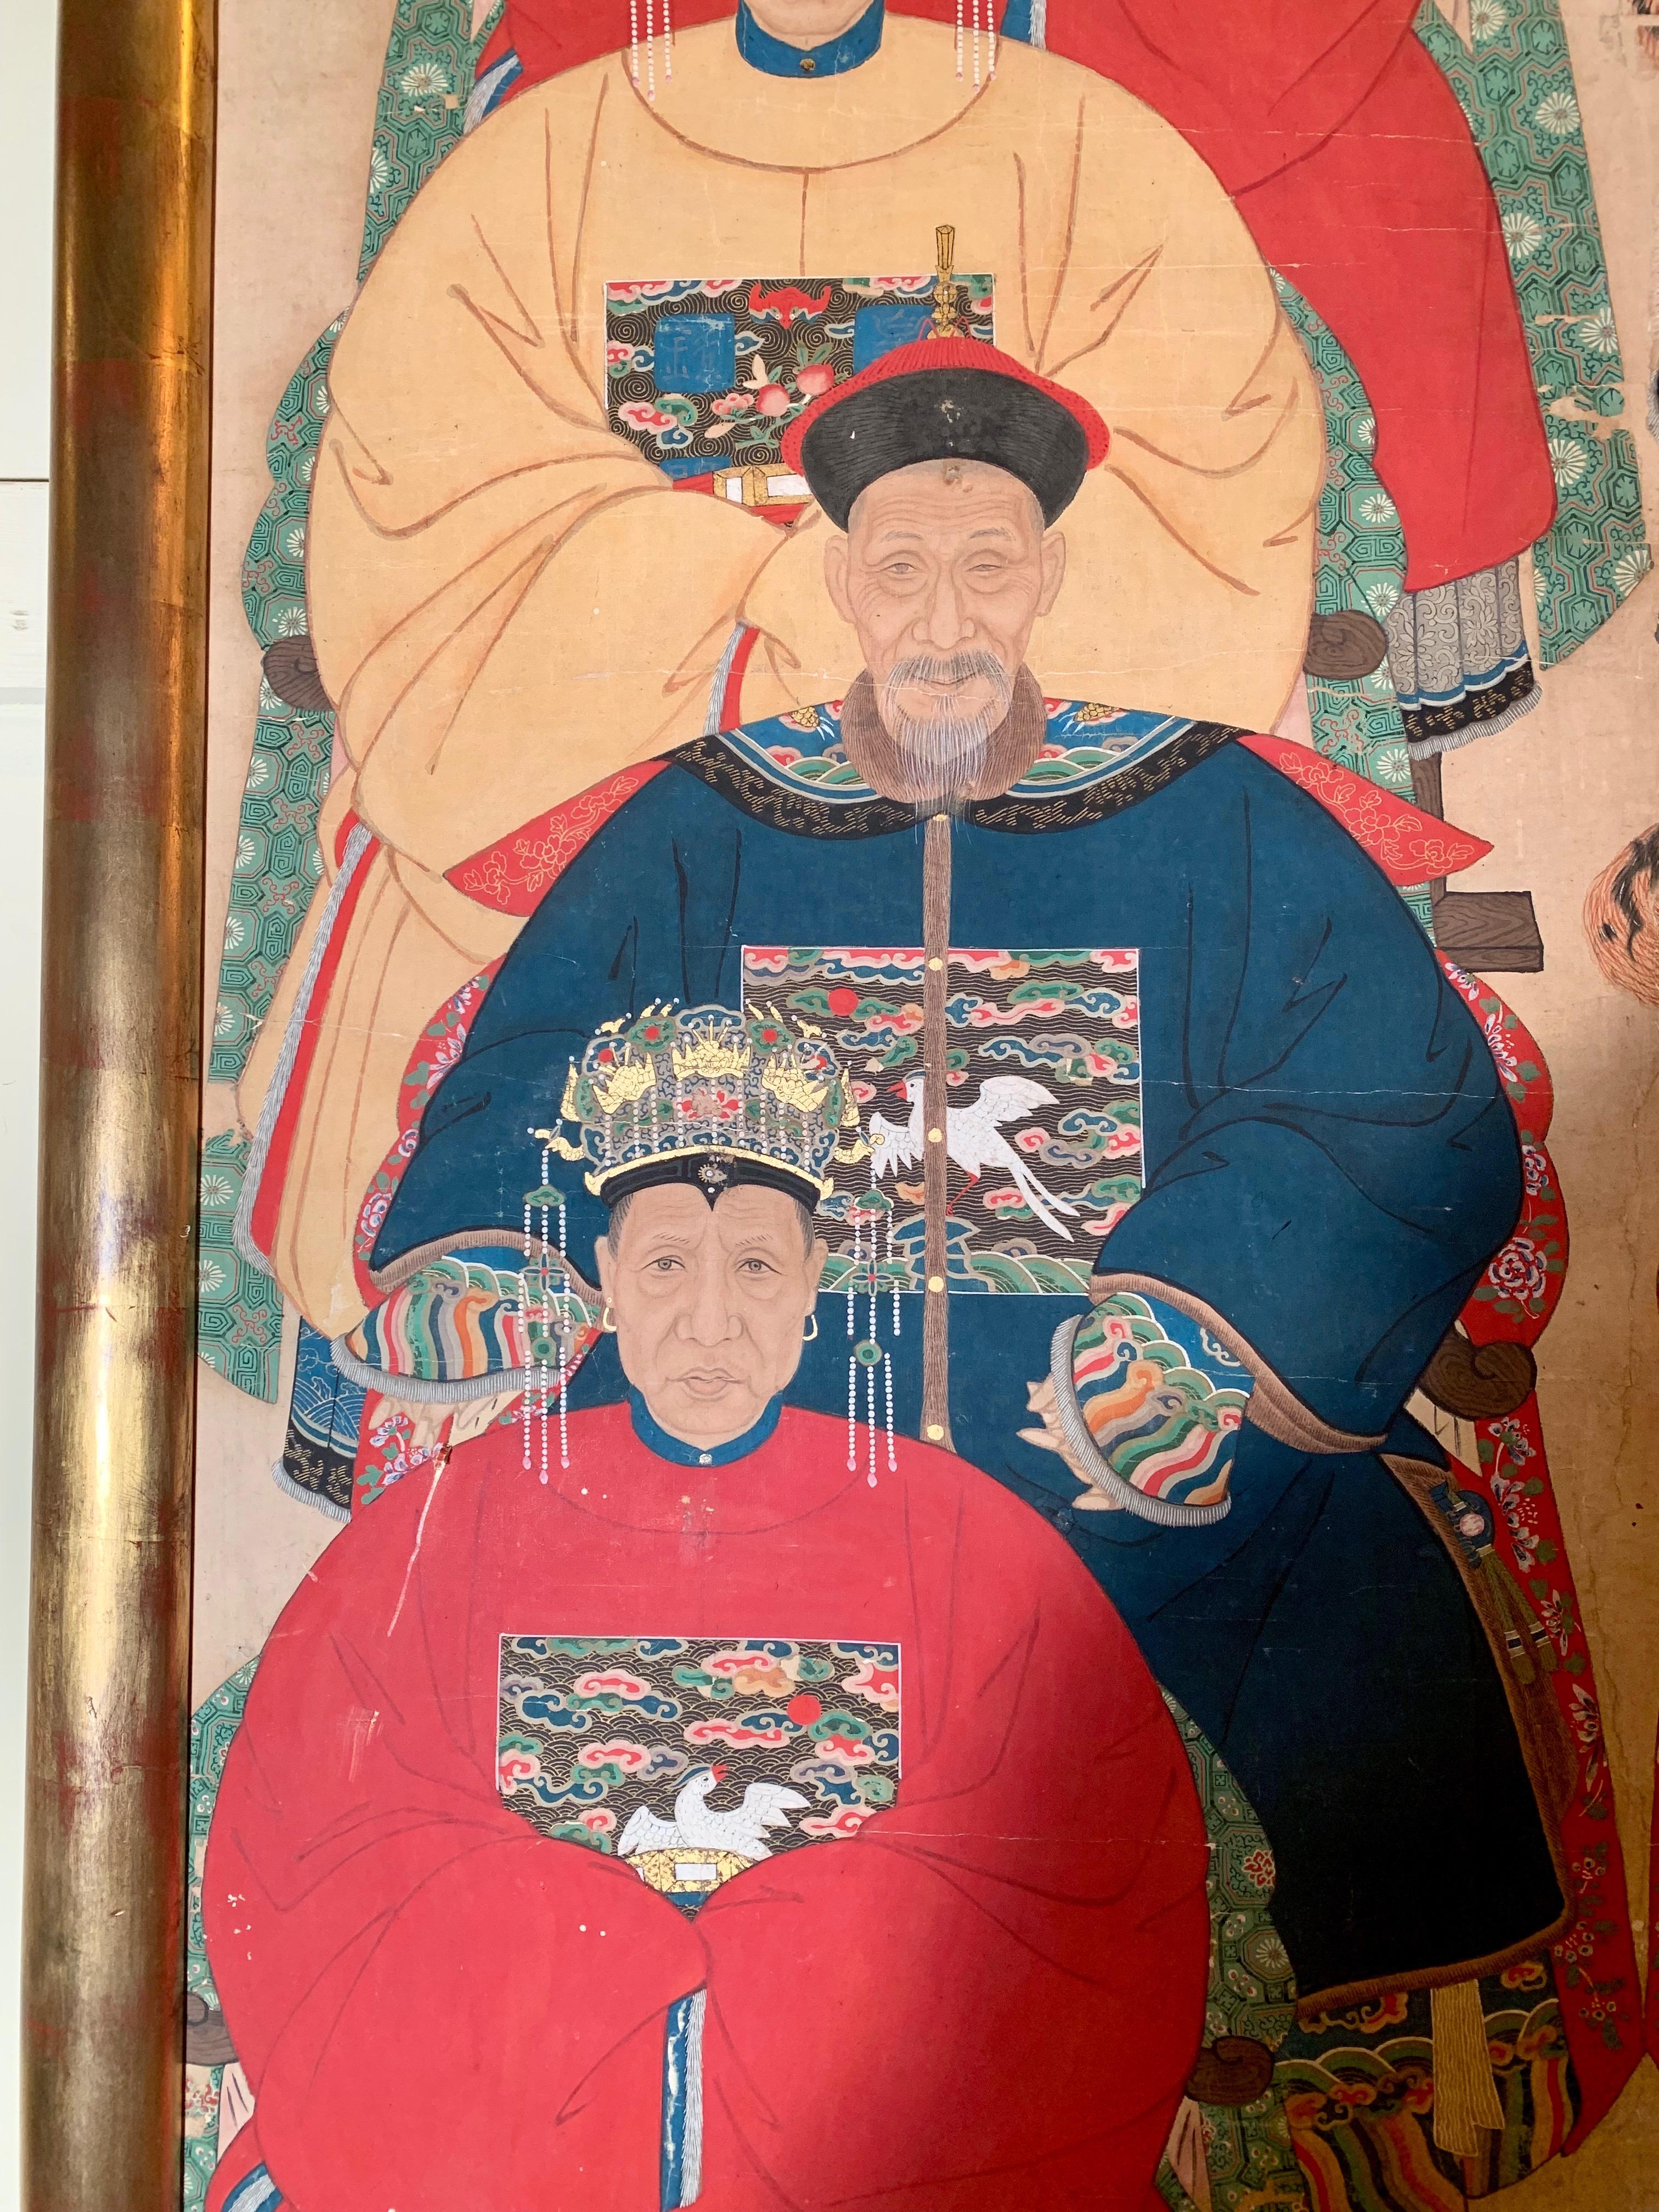 Antique 19th century painting on canvas depicting Chinese emperors.